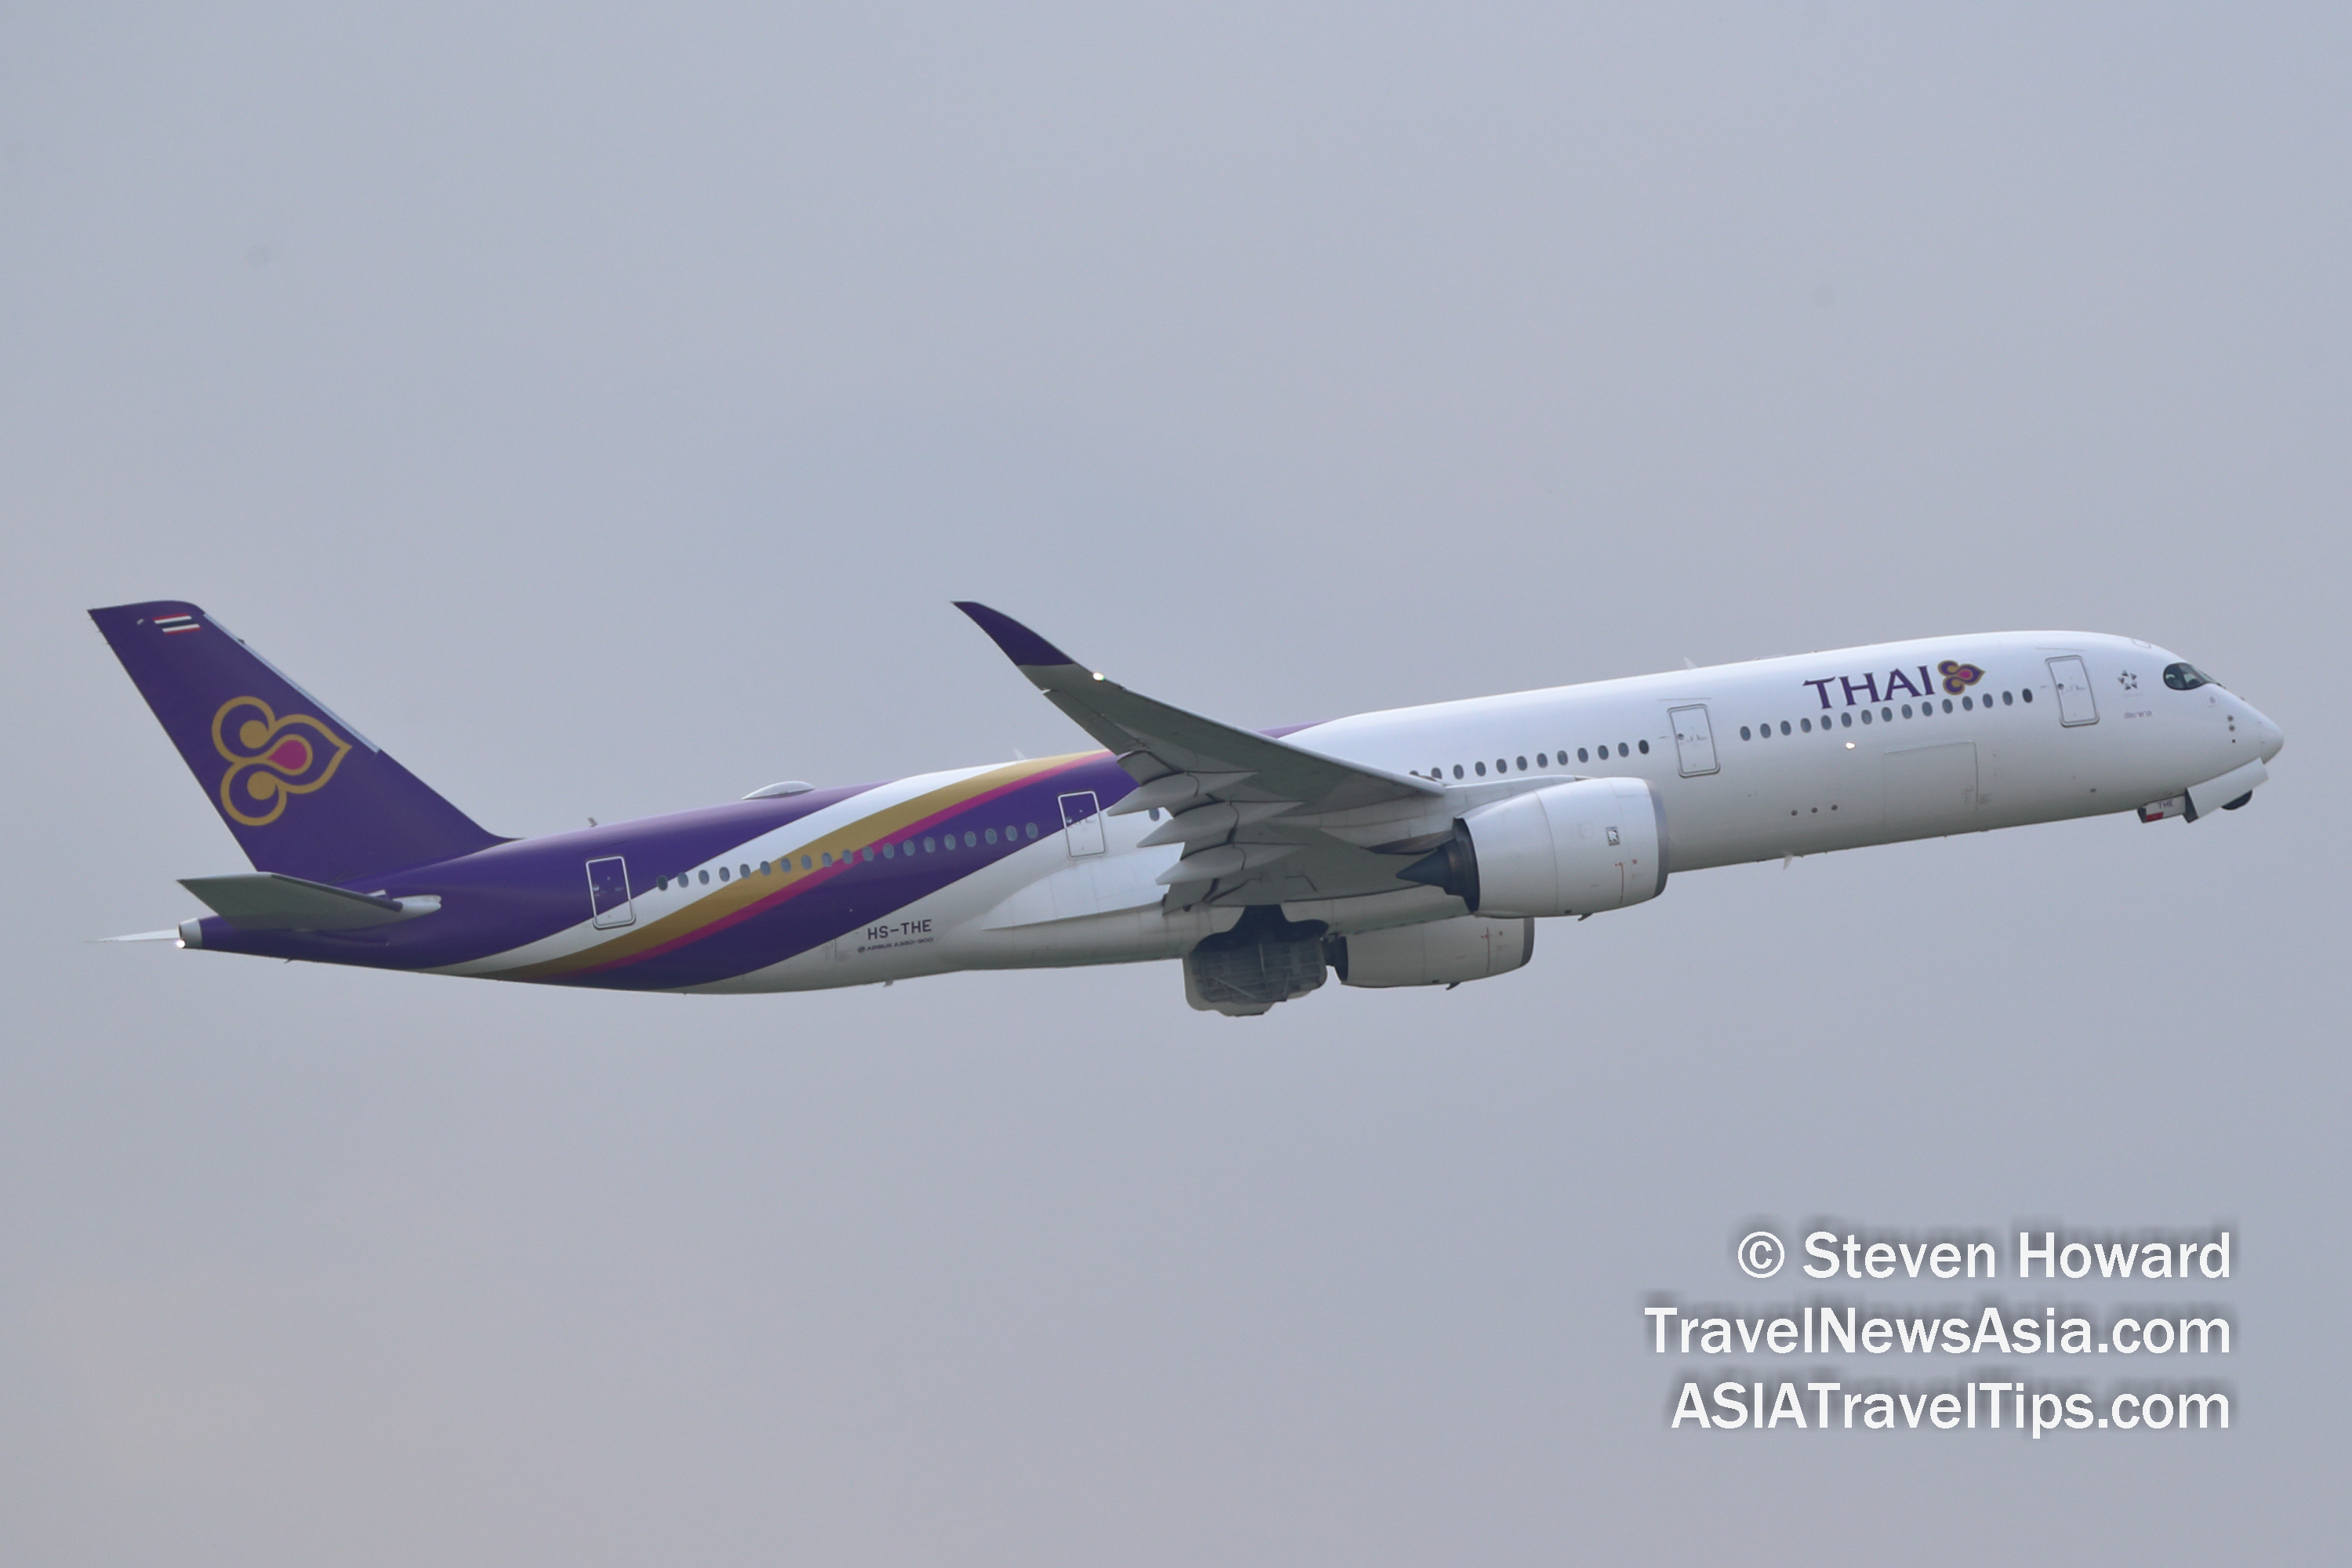 Thai Airways Airbus A350 reg: HS-THE. Picture by Steven Howard of TravelNewsAsia.com Click to enlarge.